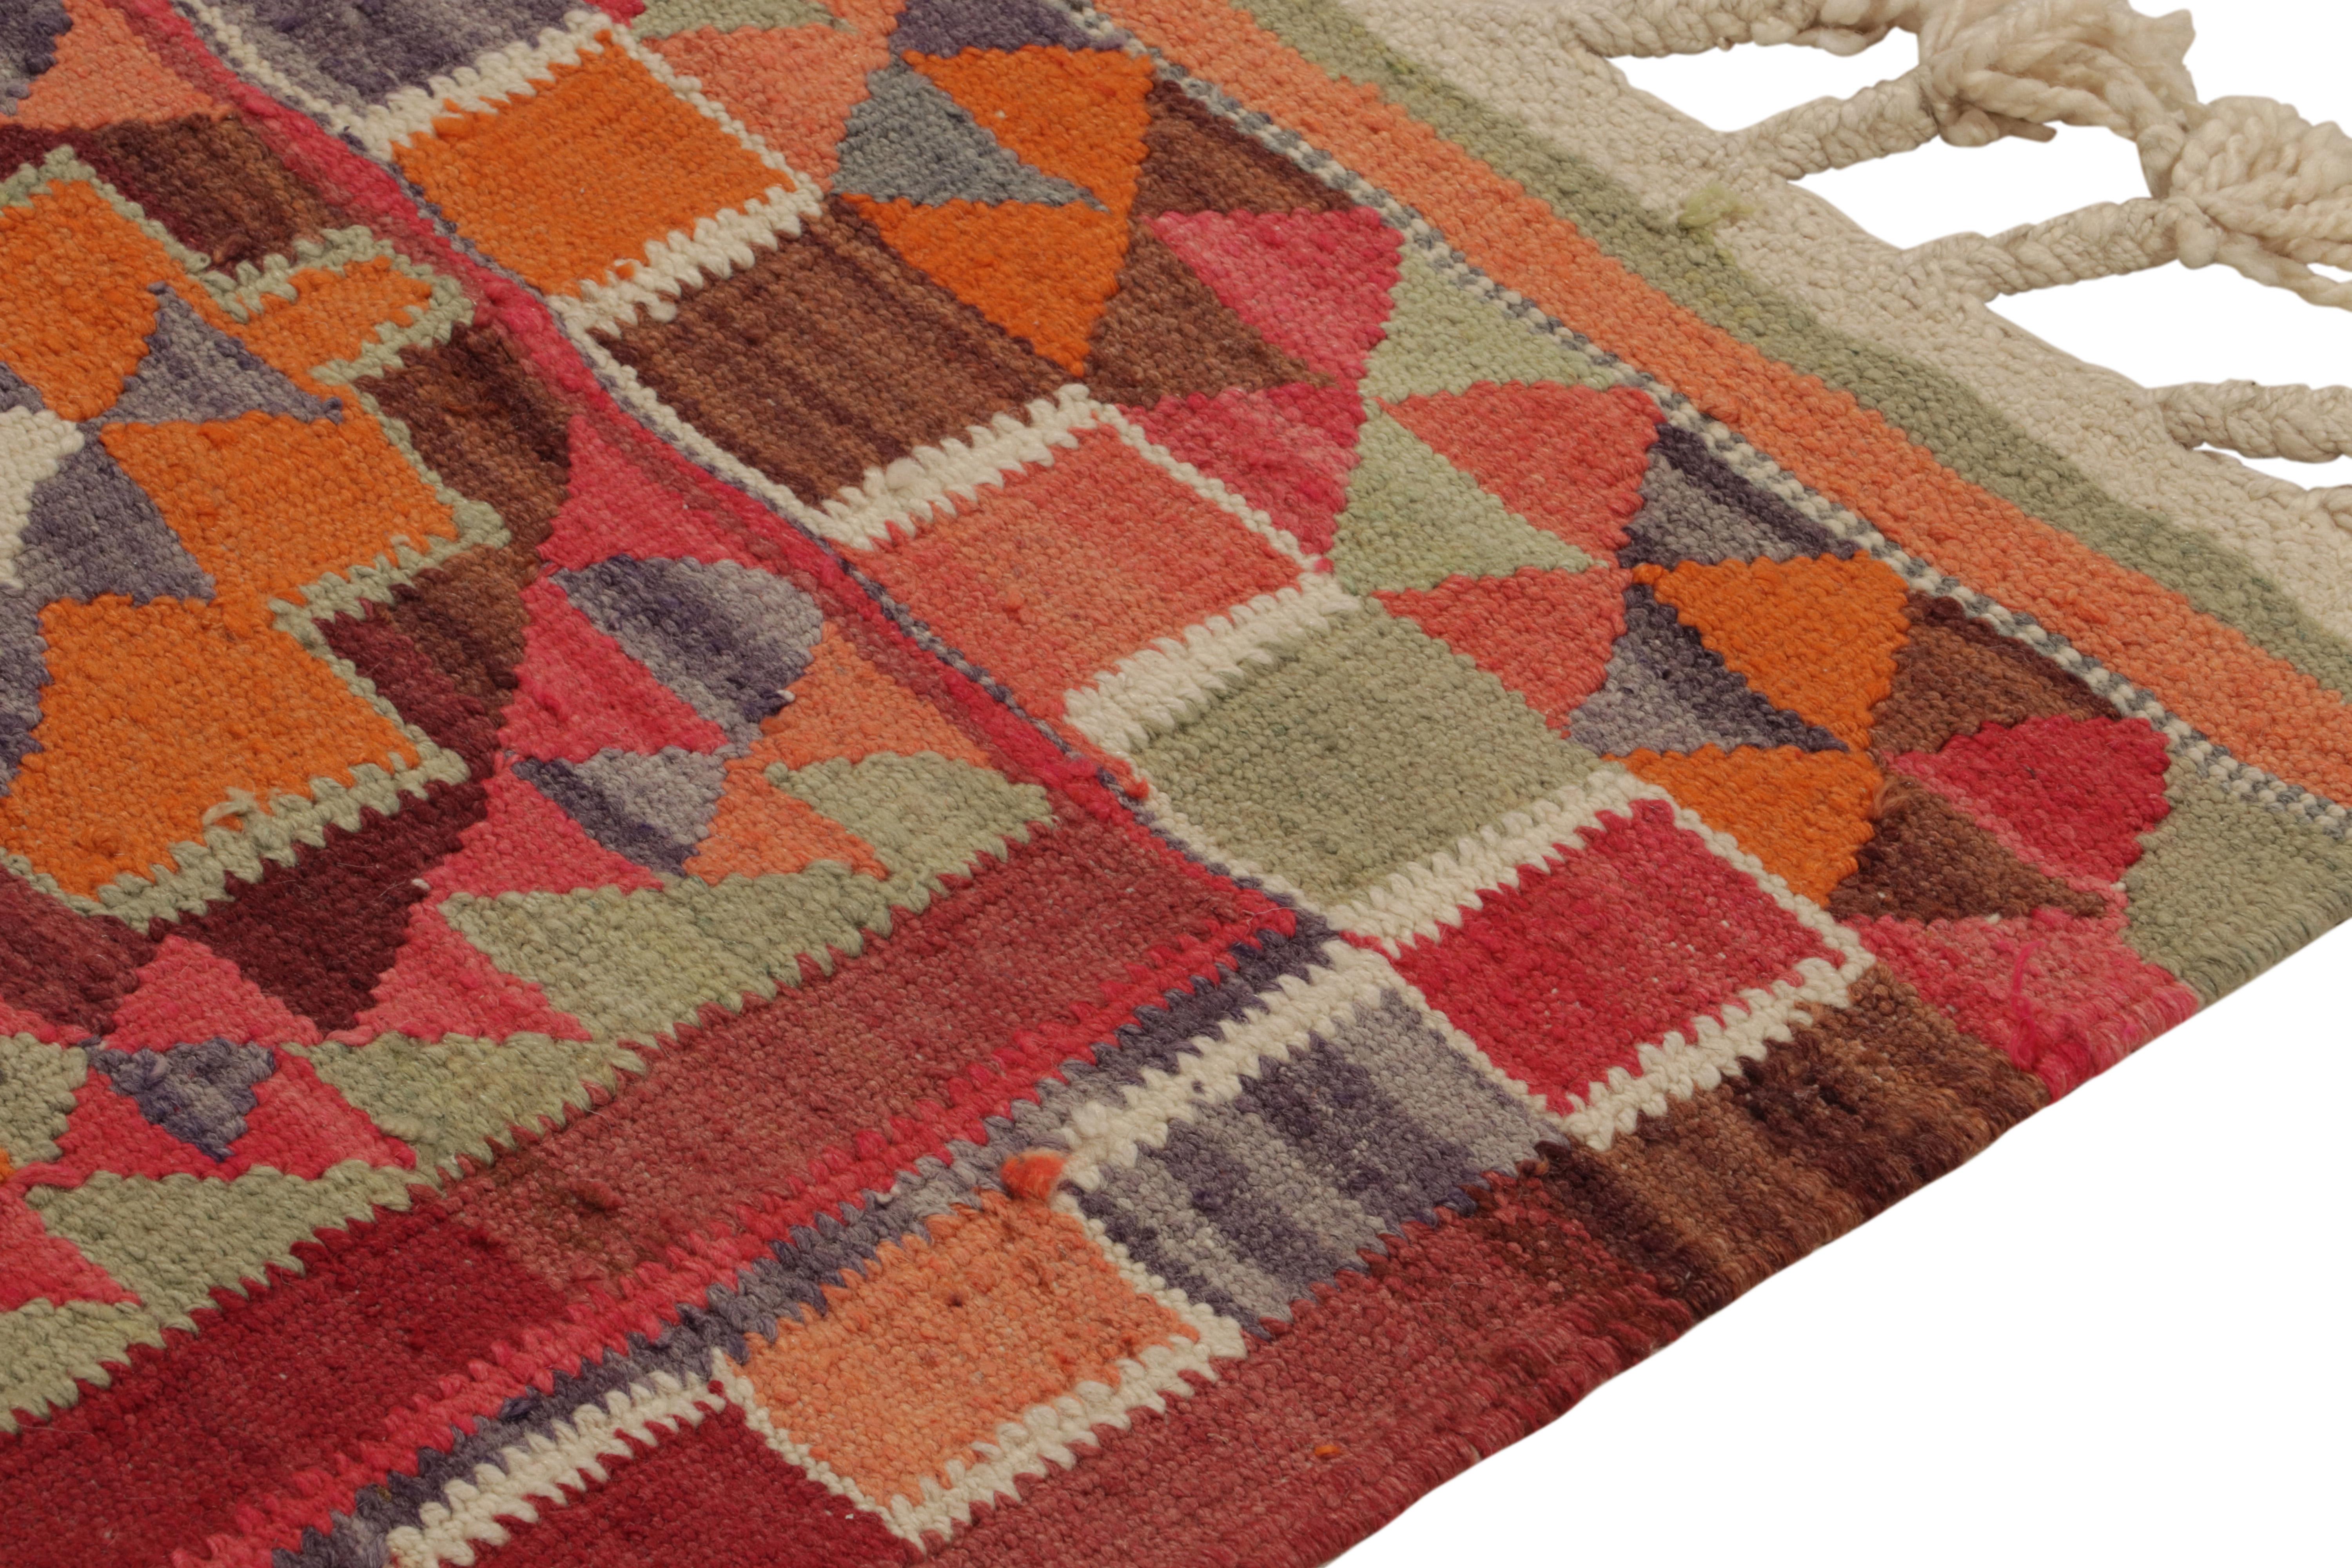 Vintage Tribal Kilim Runner in Red Orange and Geometric Pattern by Rug & Kilim In Good Condition For Sale In Long Island City, NY